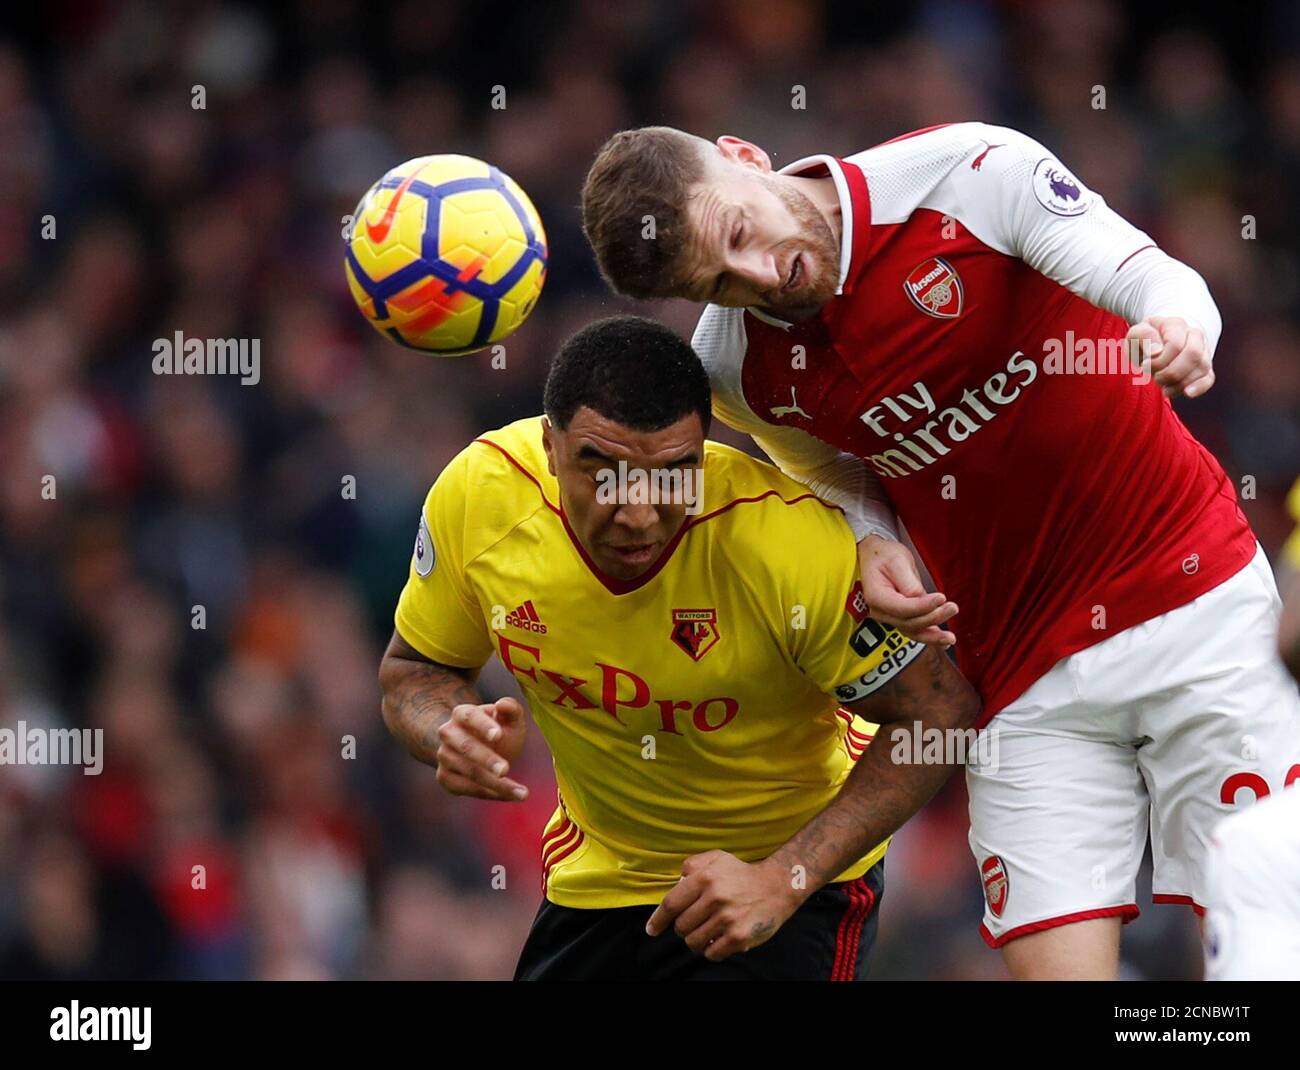 Soccer Football - Premier League - Arsenal vs Watford - Emirates Stadium, London, Britain - March 11, 2018   Watford's Troy Deeney in action with Arsenal's Shkodran Mustafi             REUTERS/Eddie Keogh    EDITORIAL USE ONLY. No use with unauthorized audio, video, data, fixture lists, club/league logos or 'live' services. Online in-match use limited to 75 images, no video emulation. No use in betting, games or single club/league/player publications.  Please contact your account representative for further details. Stock Photo